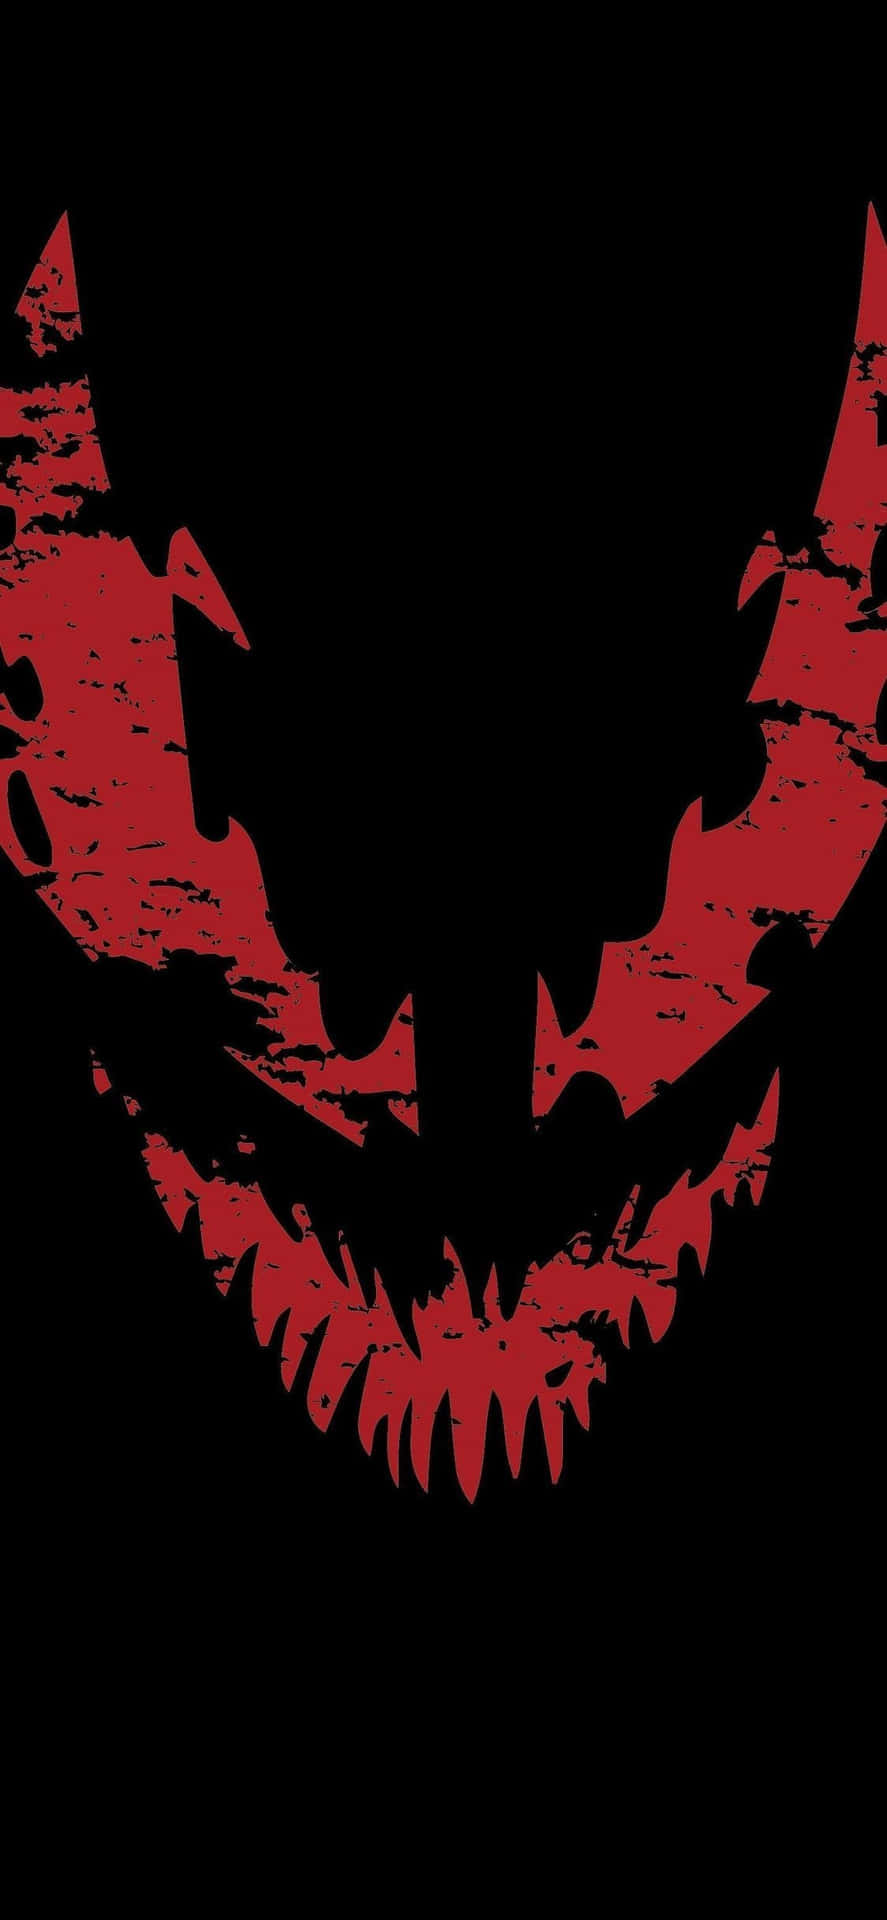 iPhone Wallpaper Featuring Carnage Wallpaper